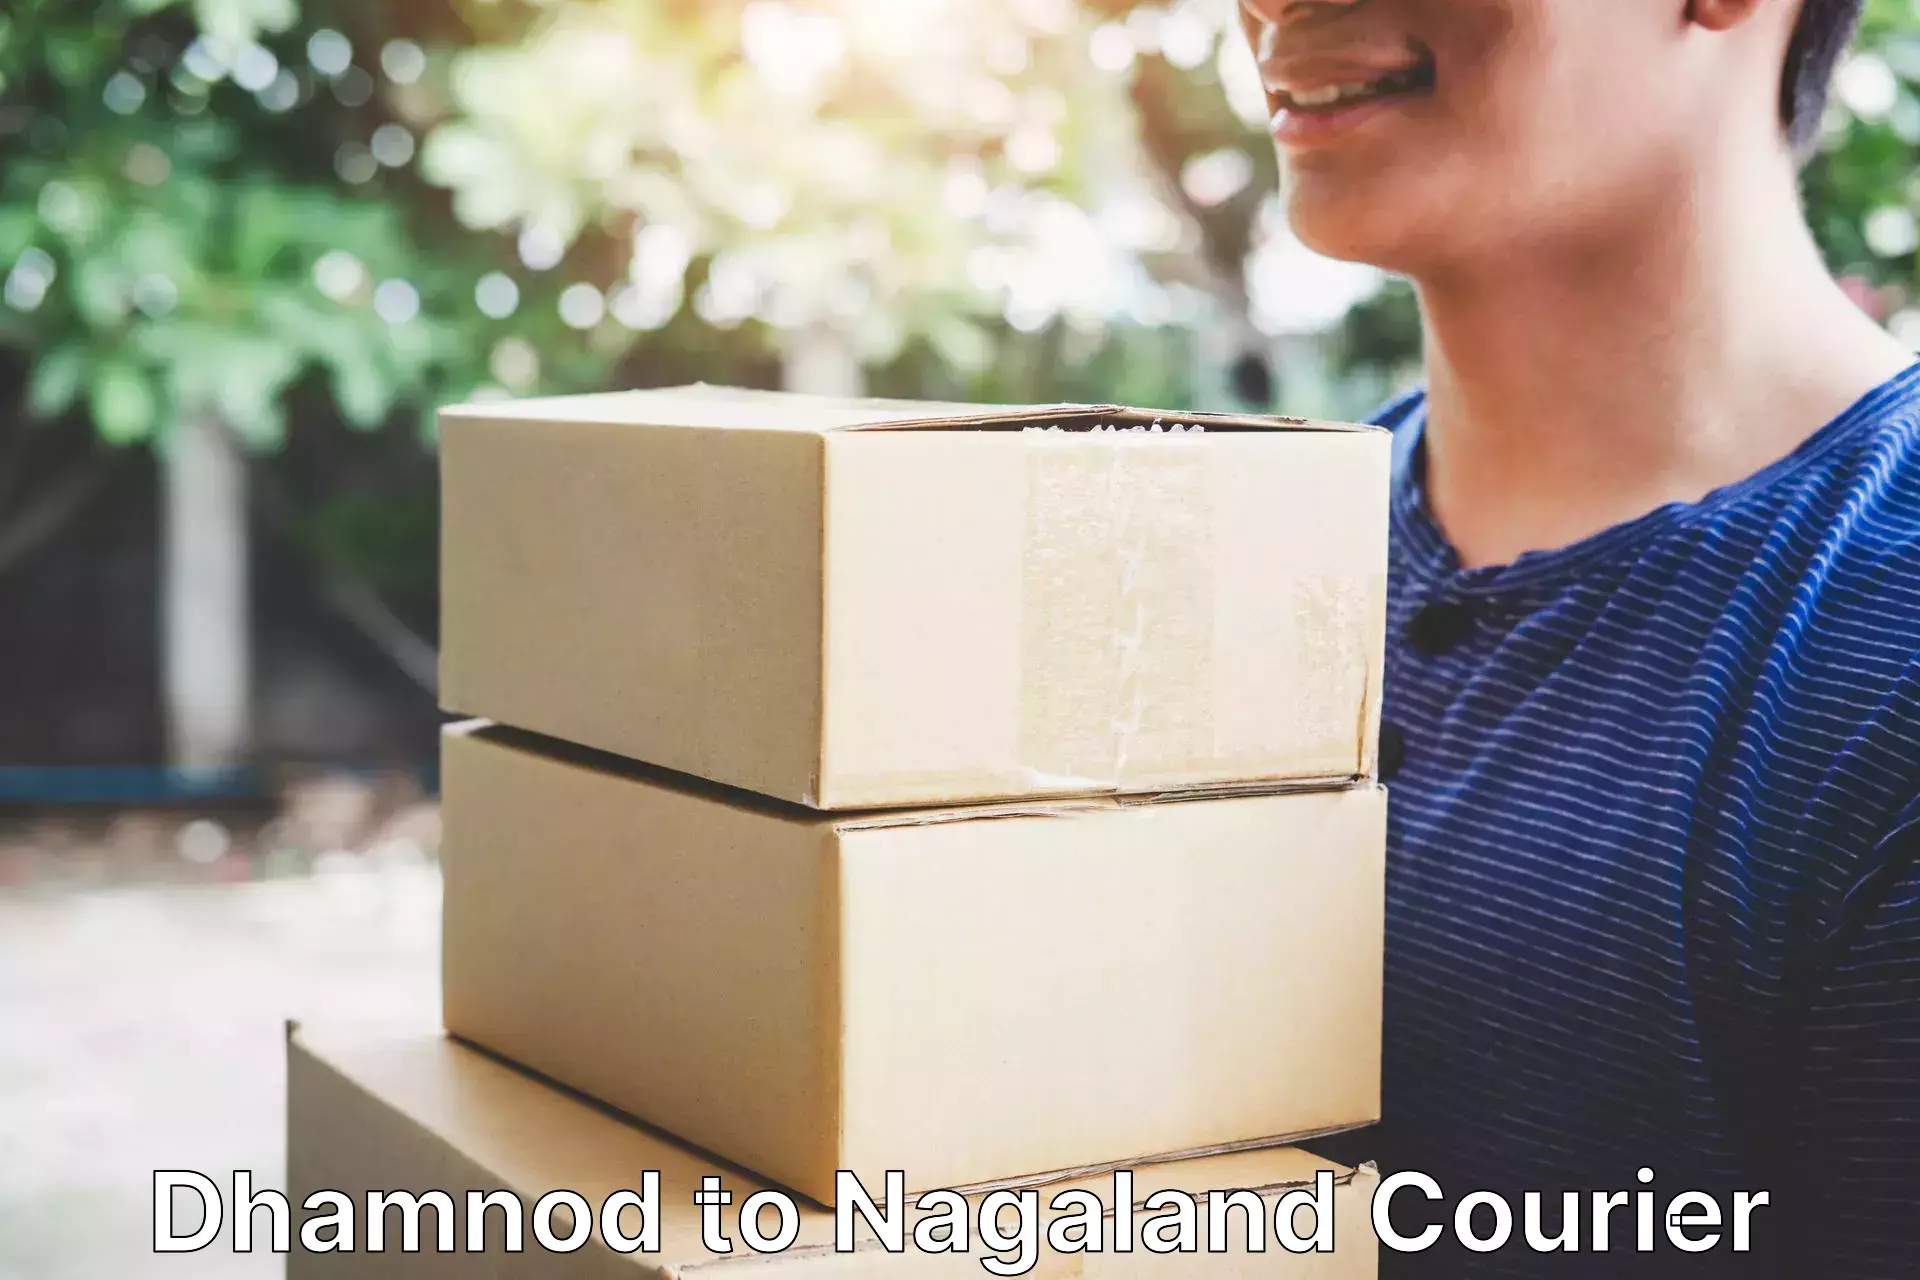 Parcel handling and care Dhamnod to Nagaland